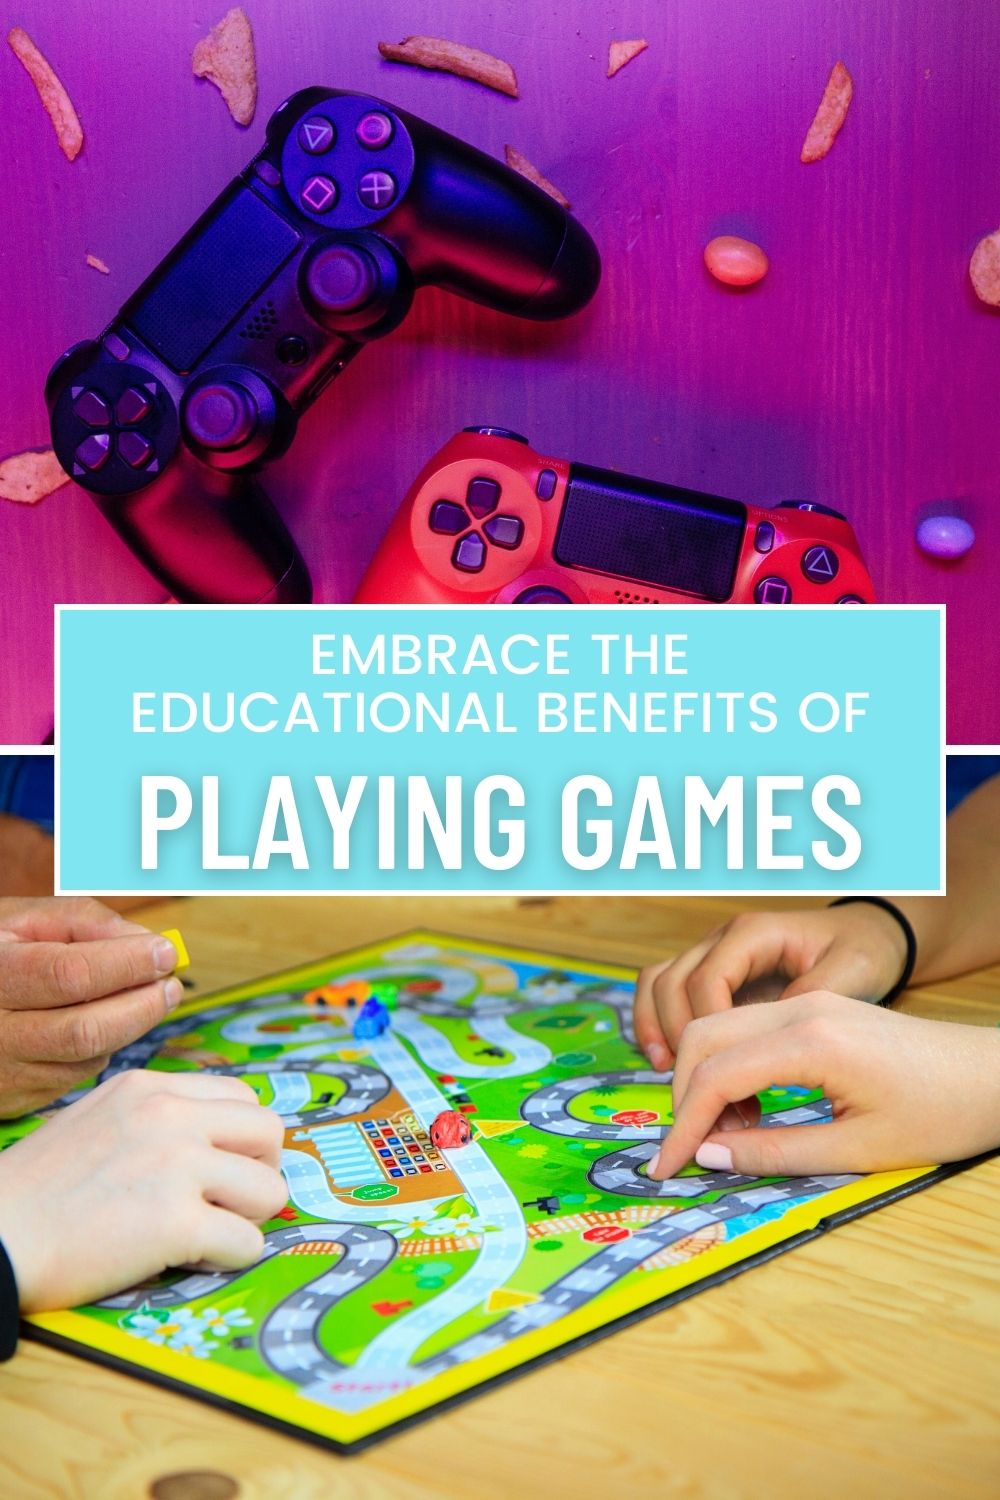 Benefits of Game Play in the Importance of Play Based Learning